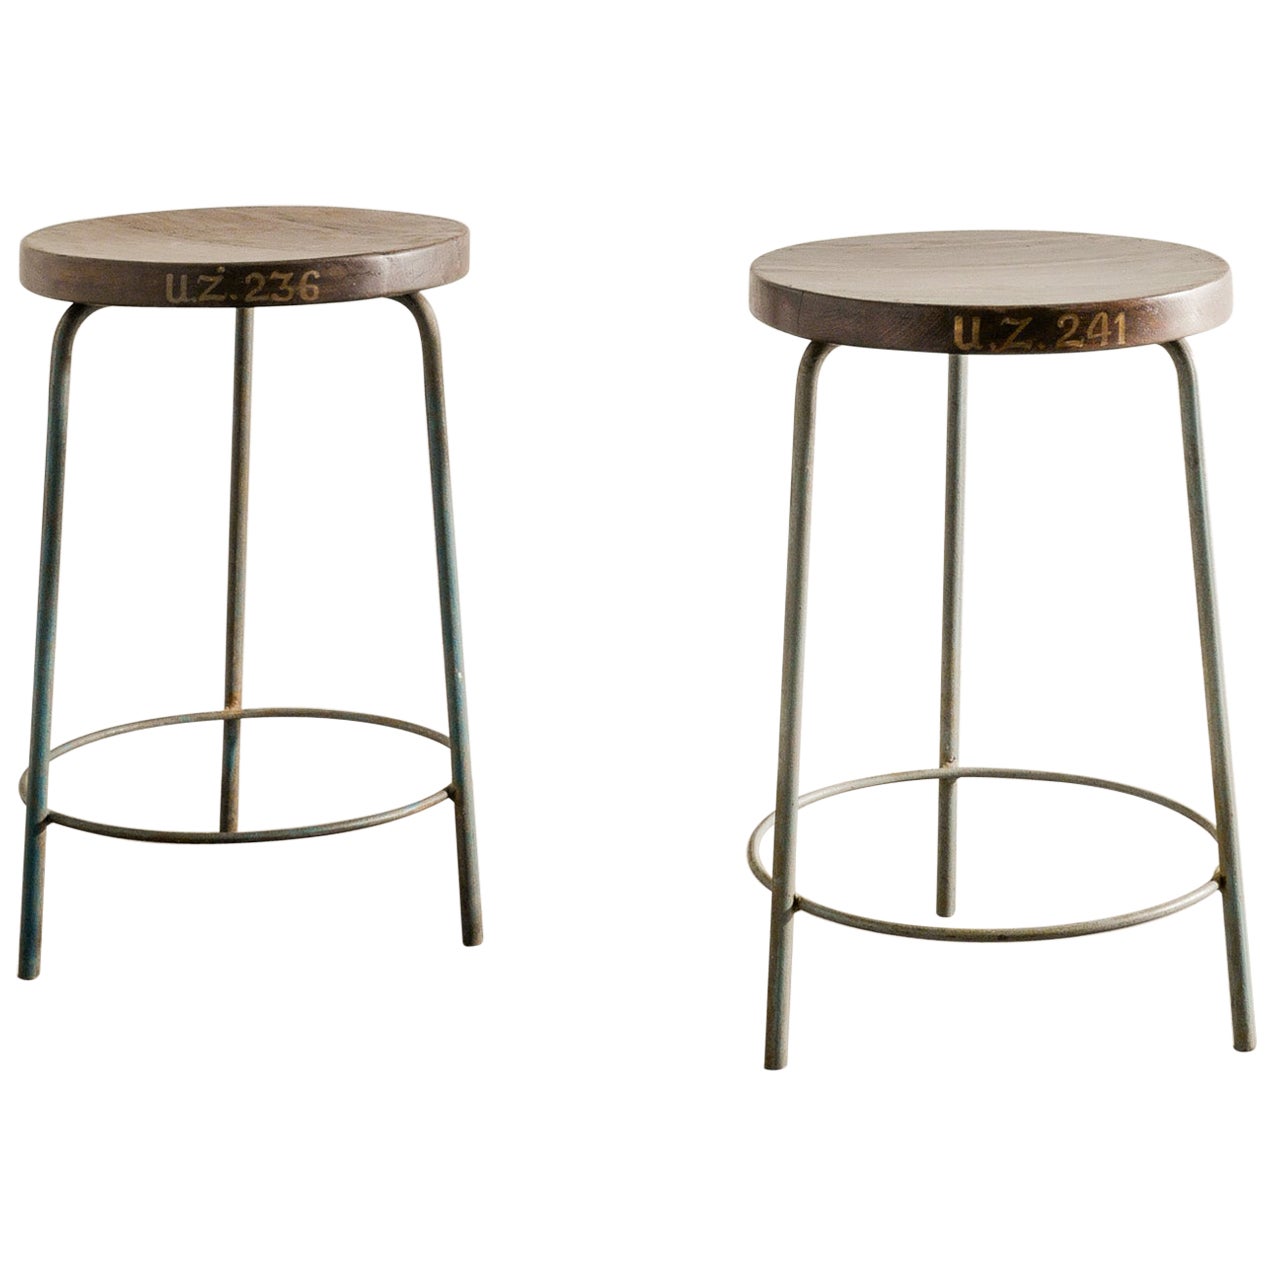 Pair of Mid Century Pierre Jeanneret High Stools in Teak & Iron Produced, 1950s For Sale